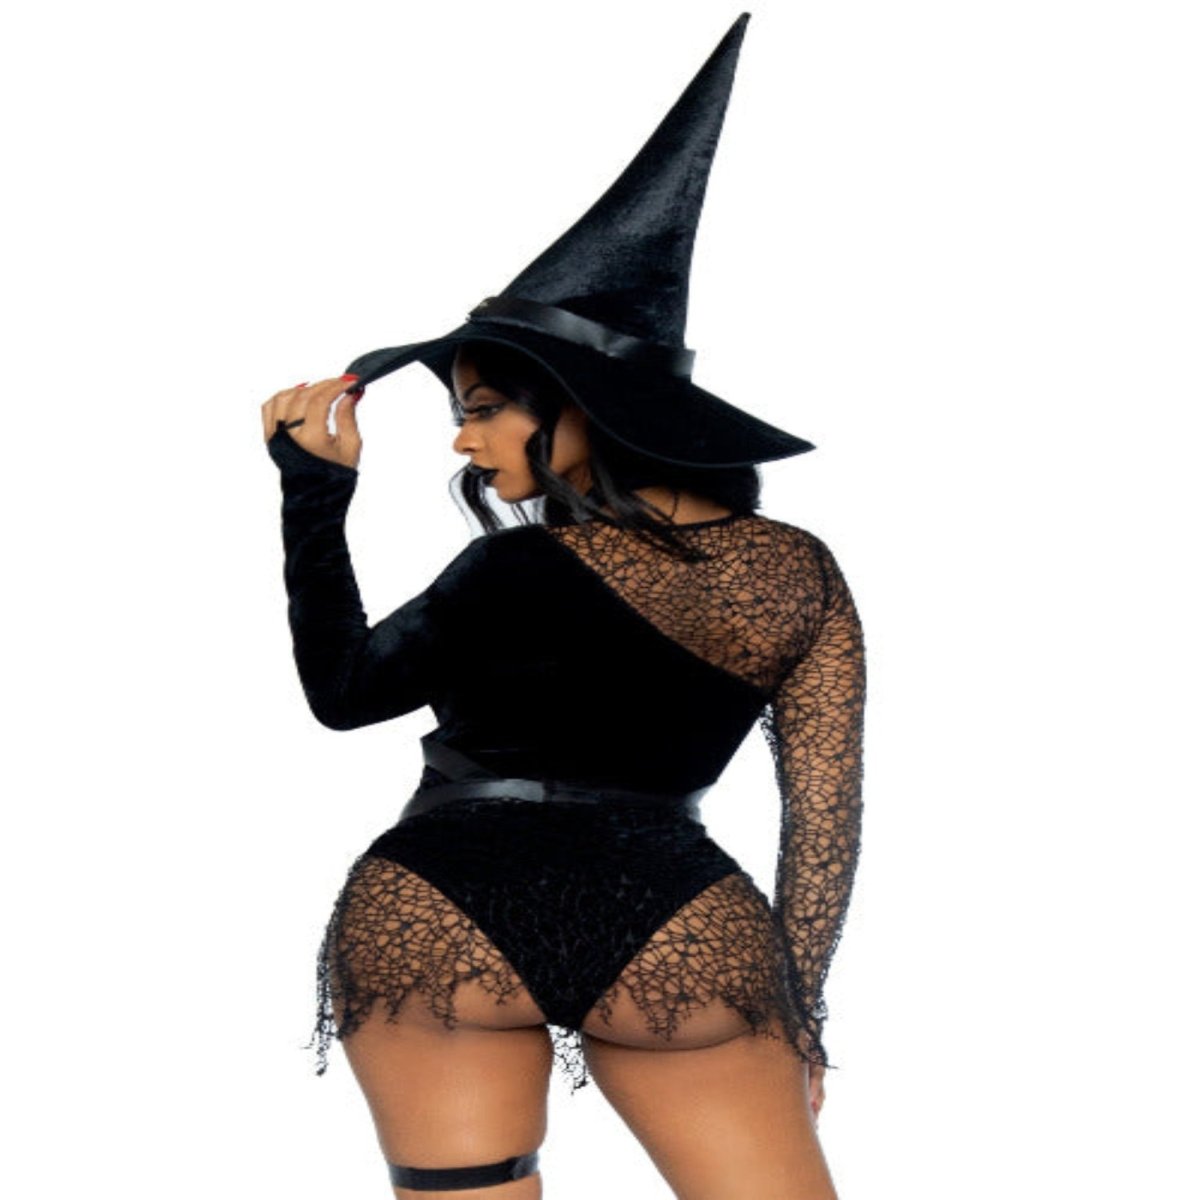 Crafty Witch Sexy Costume With Hat - worldclasscostumes